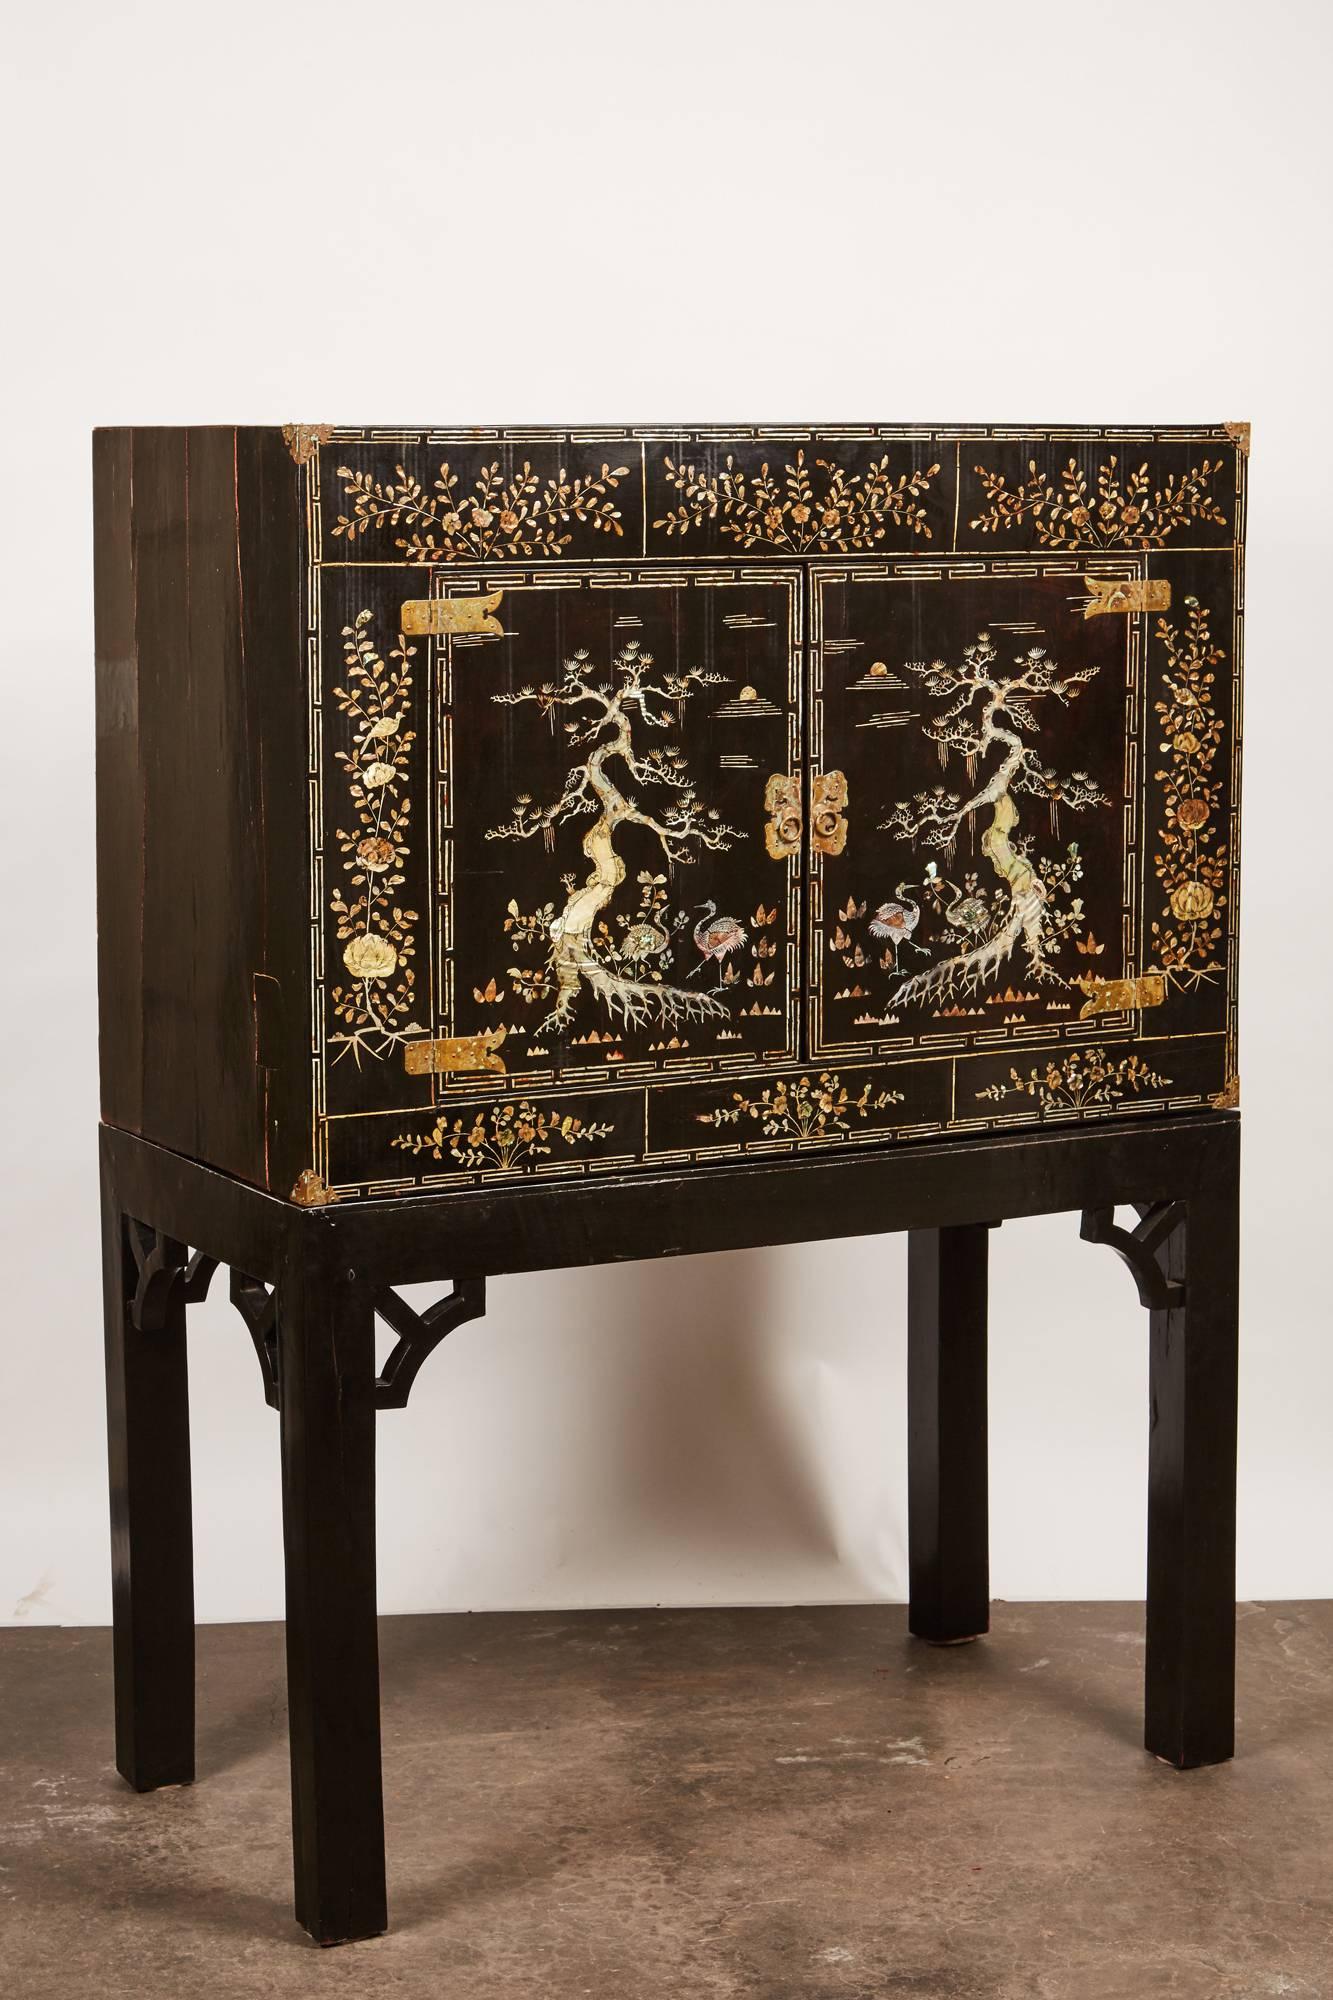 An early 20th century Vietnamese black two-door cabinet with mother-of-pearl detailing, resting on top of a black table stand. This Vietnamese piece is hinting at the Qing Dynasty by depicting motifs such as cranes, cypress trees, and peonies. The